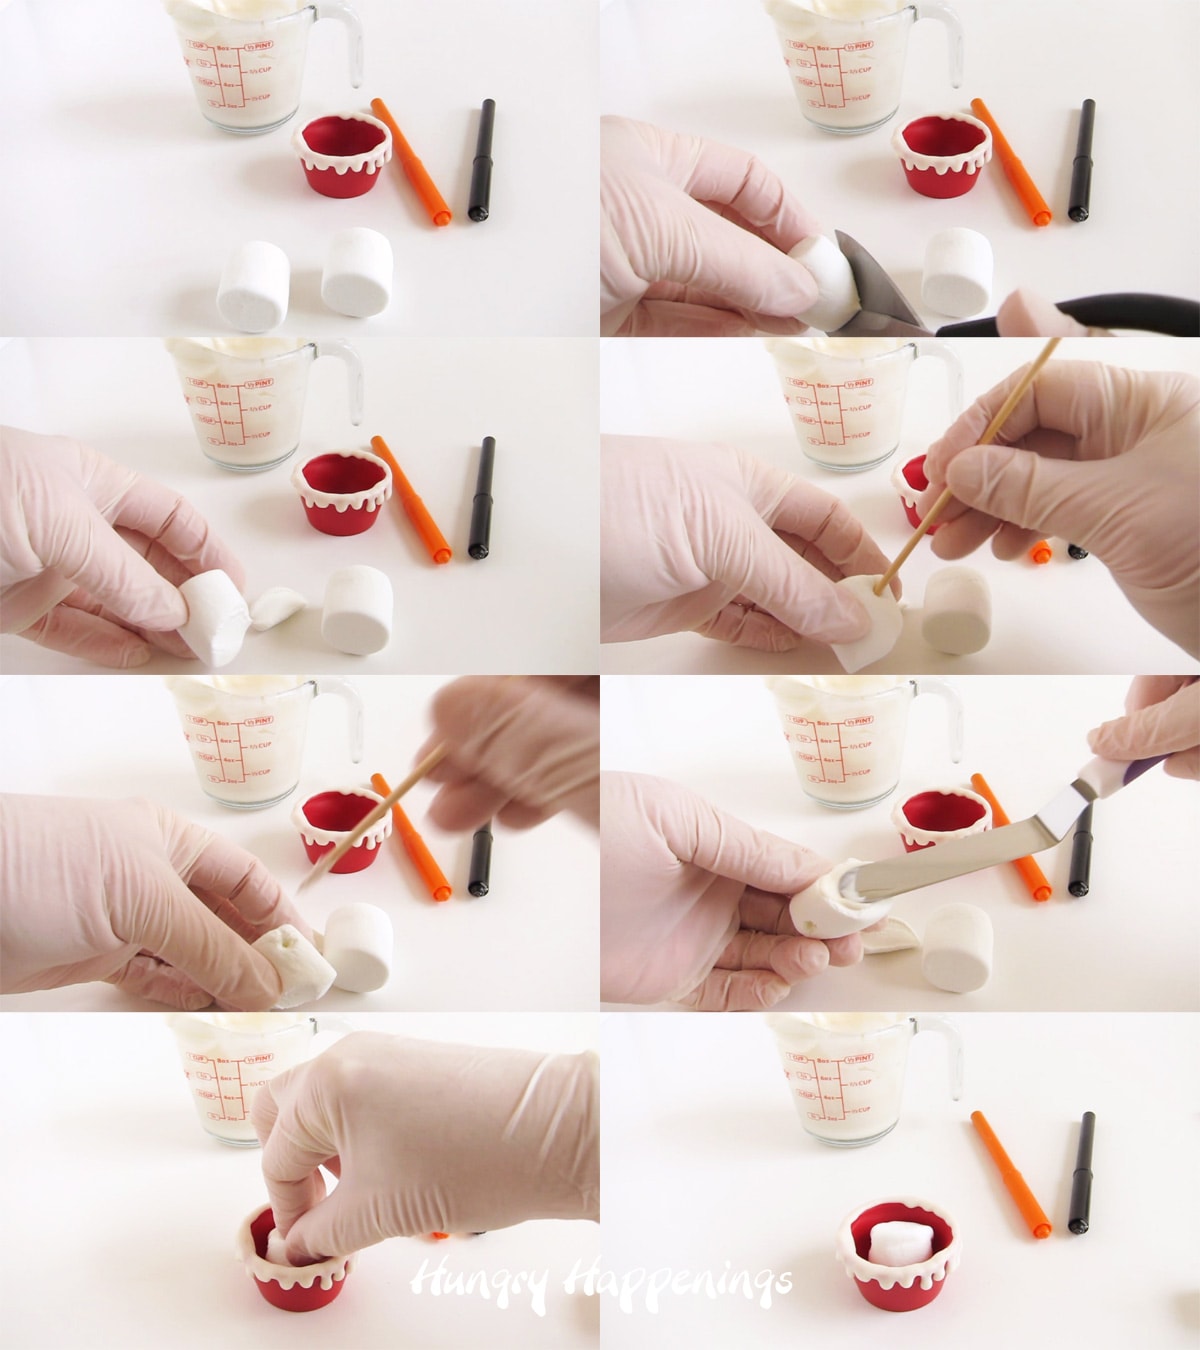 Cut a marshmallow on an angle then attach it to the red candy cups using candy melts.